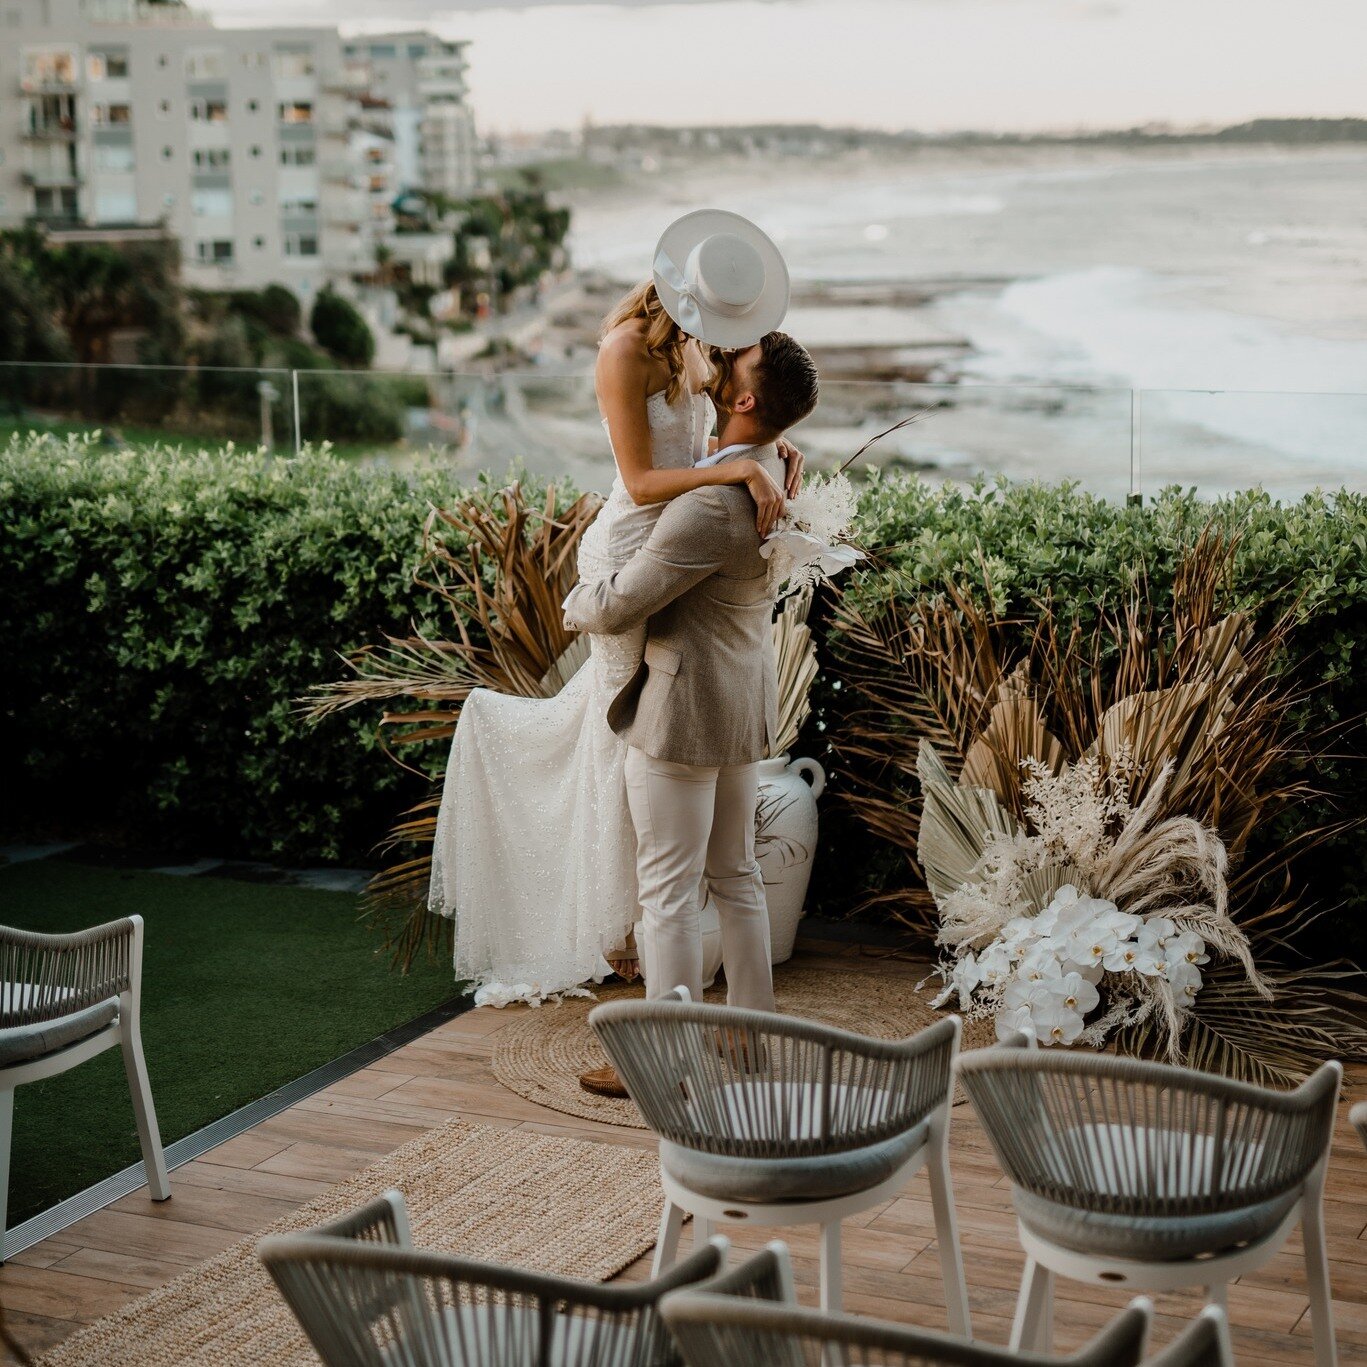 &ldquo;When you realize you want to spend the rest of your life with somebody, you want the rest of your life to start as soon as possible.&rdquo; &mdash; When Harry Met Sally. 

Start your journey together at Esplanade Events where the team prides i